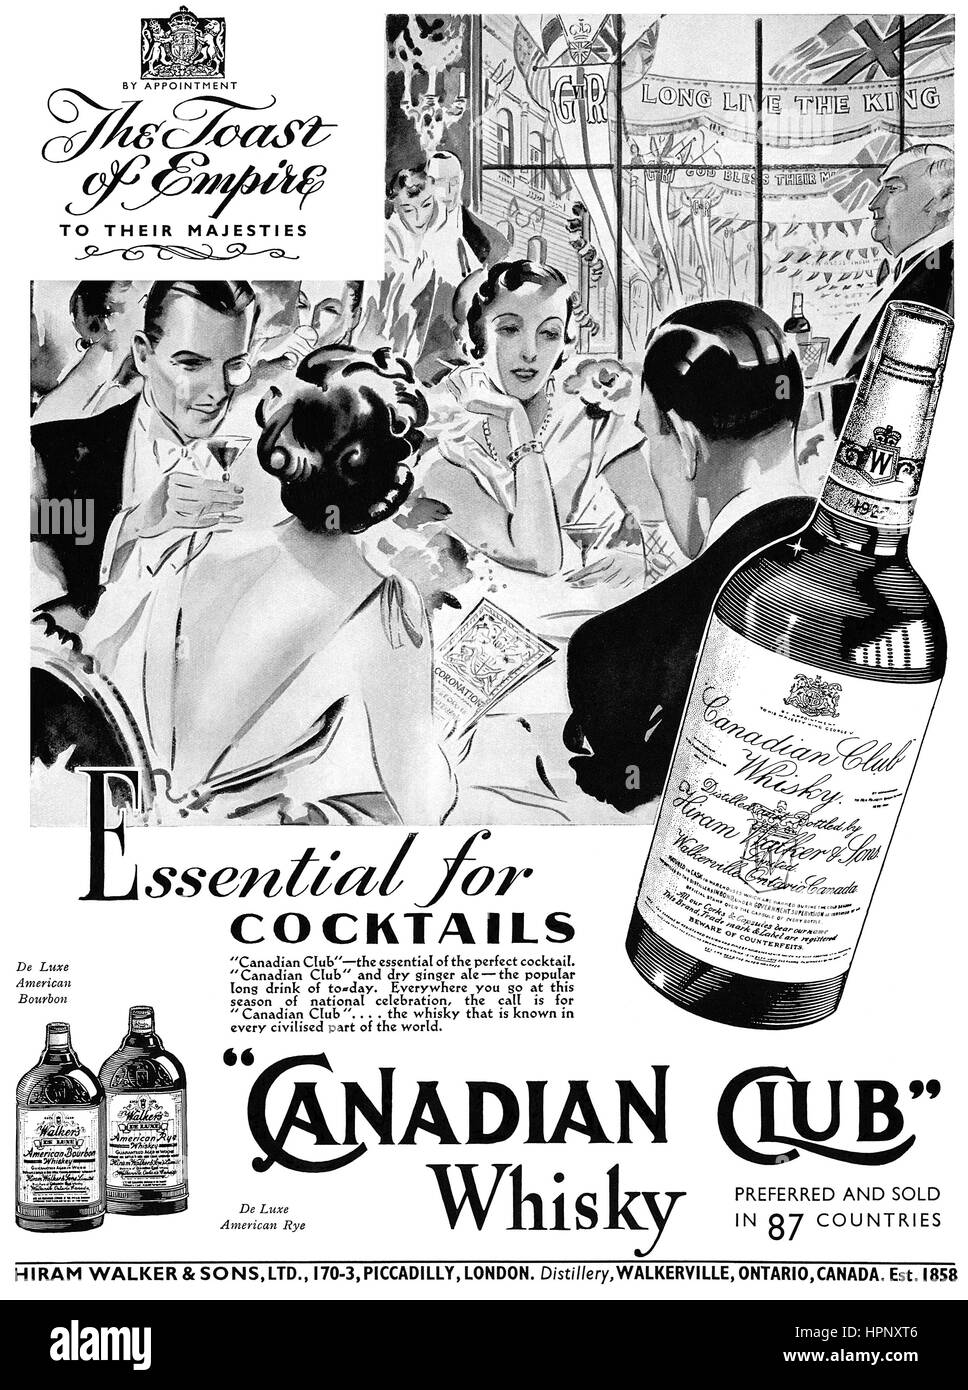 1937 British advertisement for Canadian Club Whisky, celebrating the coronation of King George VI. Stock Photo